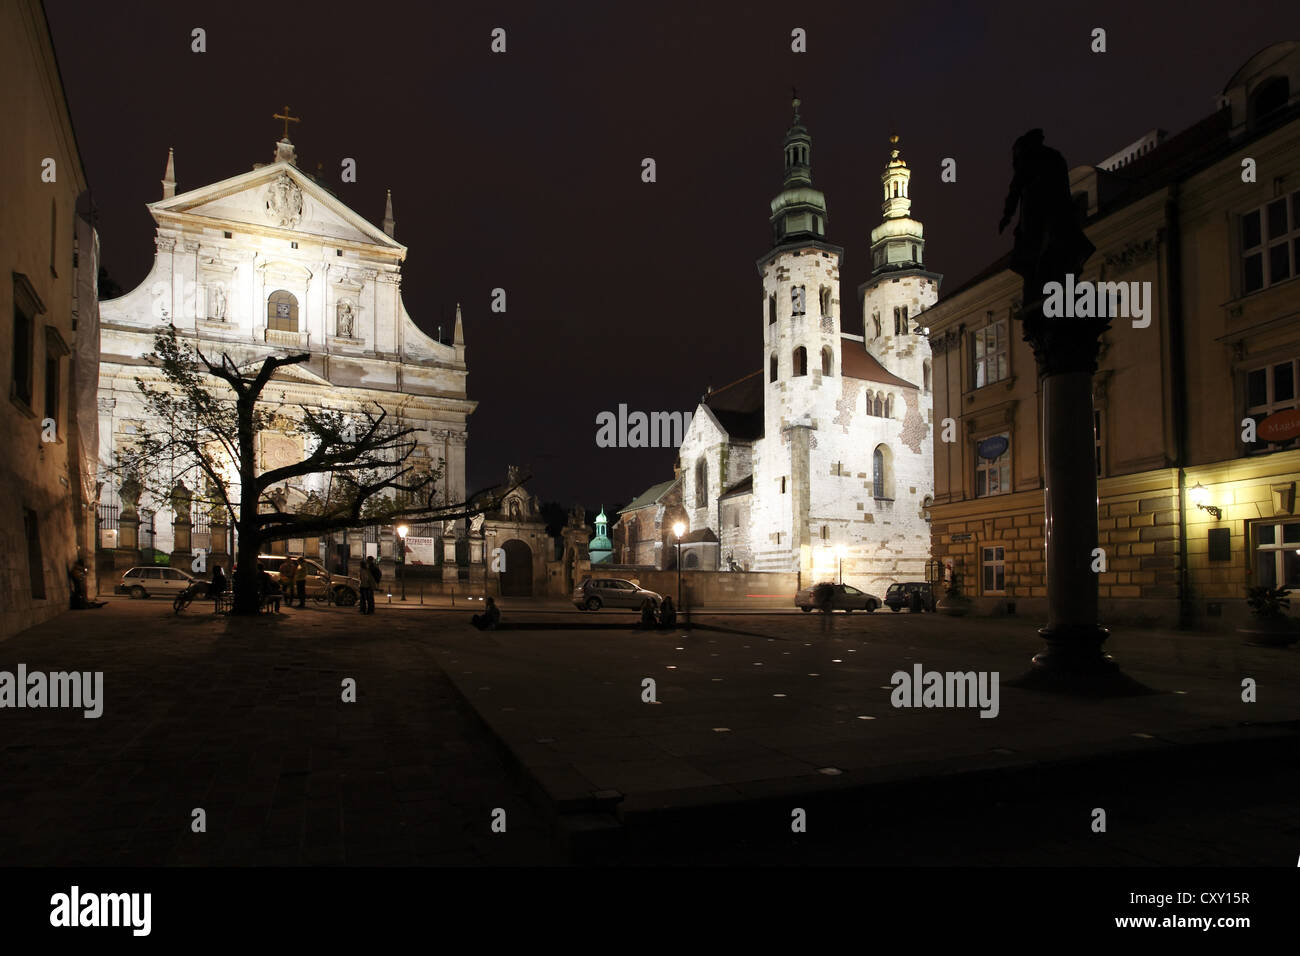 Church of St. Peter and Paul, St. Andrew's Church, Mary Magdalene square at night, Krakow, Poland, Europe Stock Photo